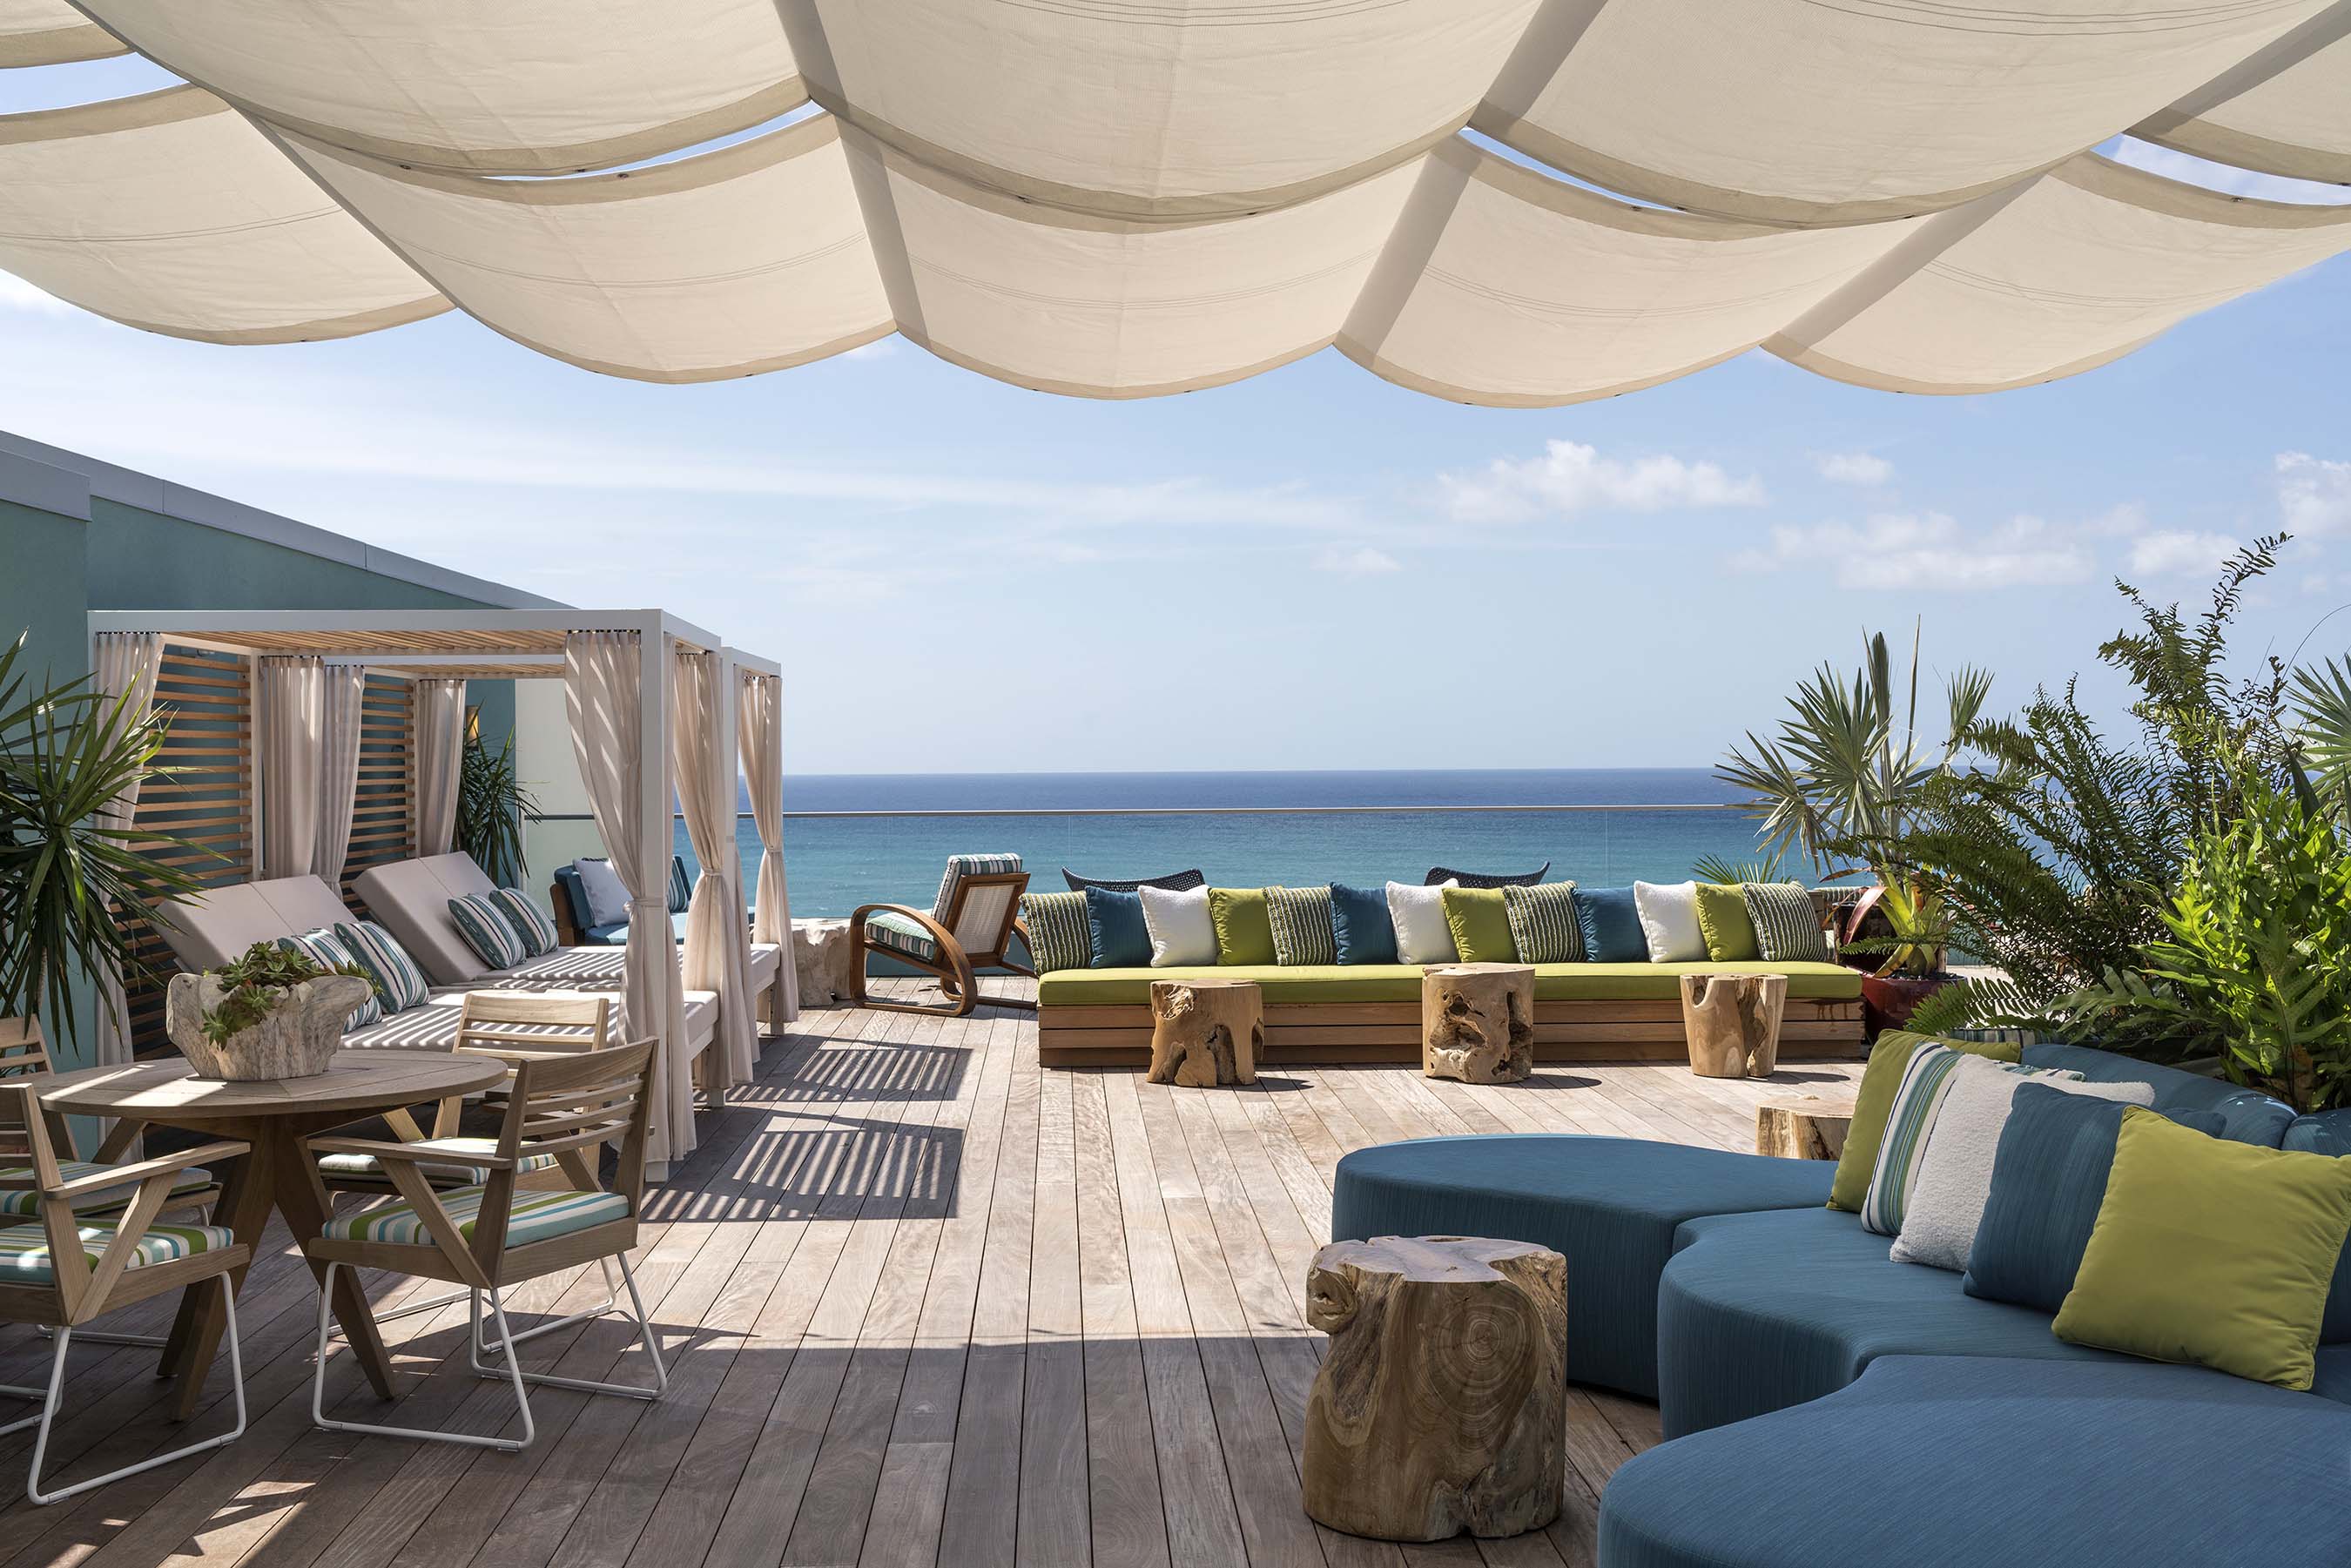 The Residences at Seafire's rooftop entertaining space "The Nest," with 360-degree views of the Caribbean Sea and North Sound, exclusively for residents